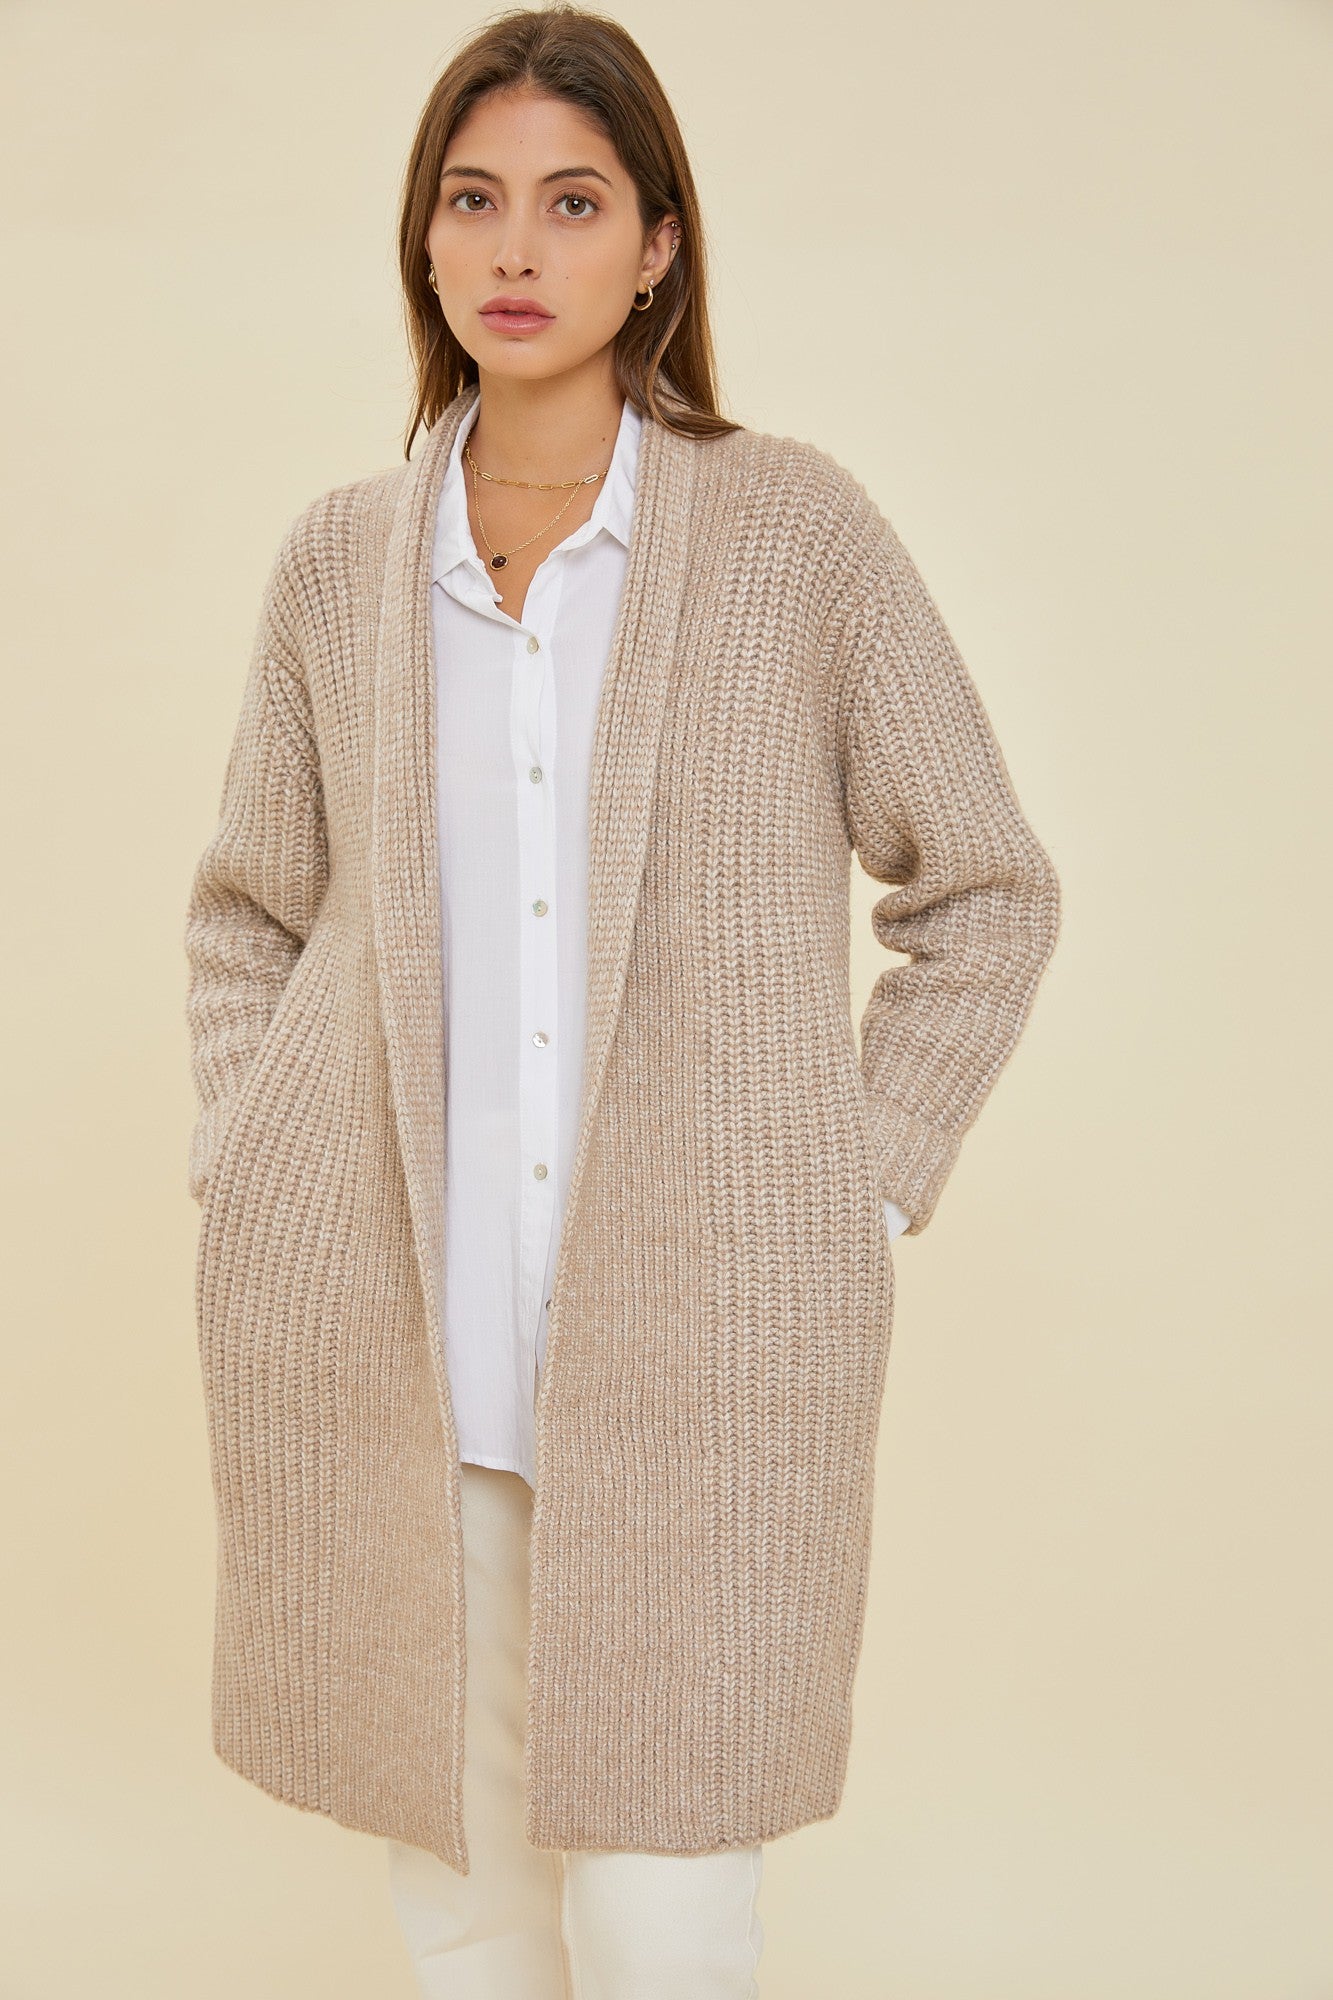 Oatmeal Maxi Length Knitted Cardigan